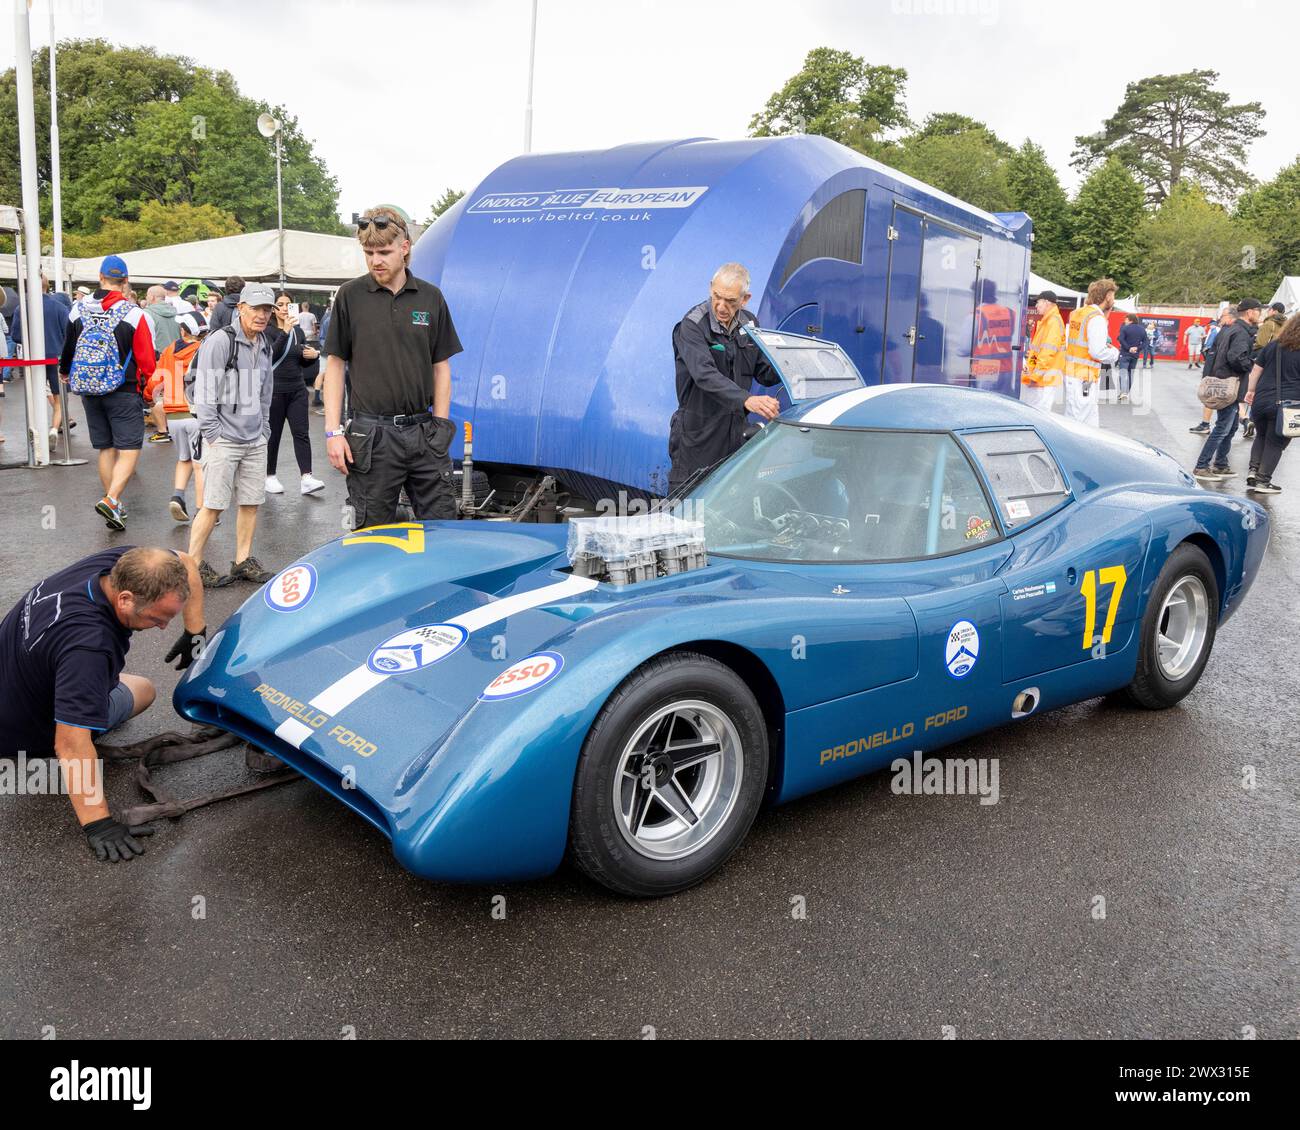 1969 Pronello-Ford Huayra being loaded onto the transporter at the 2023 Goodwood Festival of Speed, Sussex, UK Stock Photo